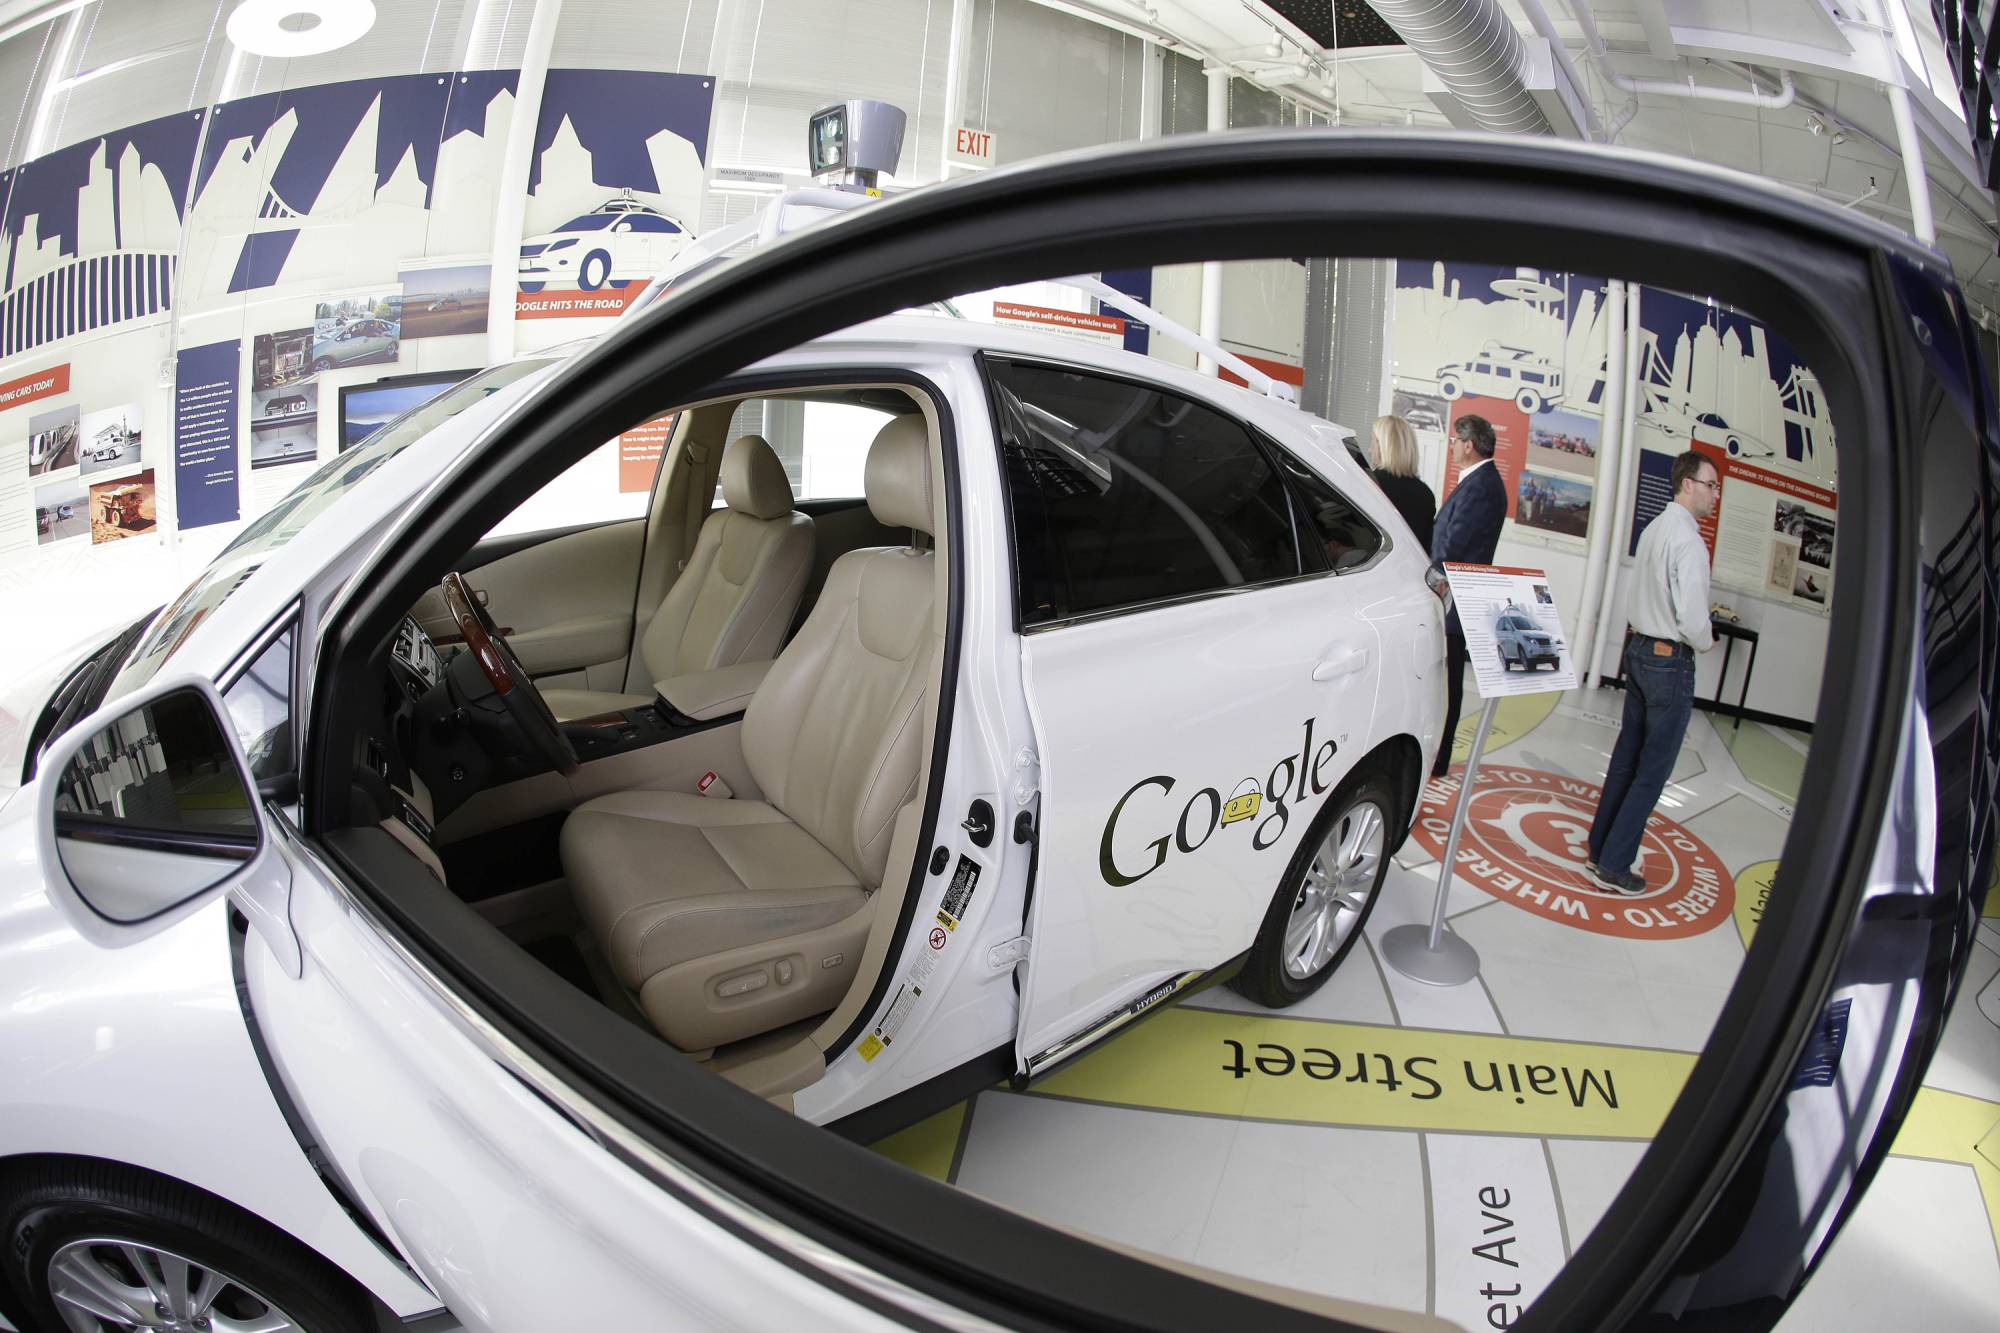 FILE - In this photo Wednesday, May 14, 2014 file photo, a Google self-driving car is on exhibit at the Computer History Museum in Mountain View, Calif. Driverless cars will be tested on California roads for the first time without a human being behind a steering wheel under new rules for the fast-developing technology. The regulations approved Monday, Feb. 26, 2018, are a major step toward getting autonomous vehicles onto the streets of California, the nation's self-driving car hub. (AP Photo/Eric Risberg, File)